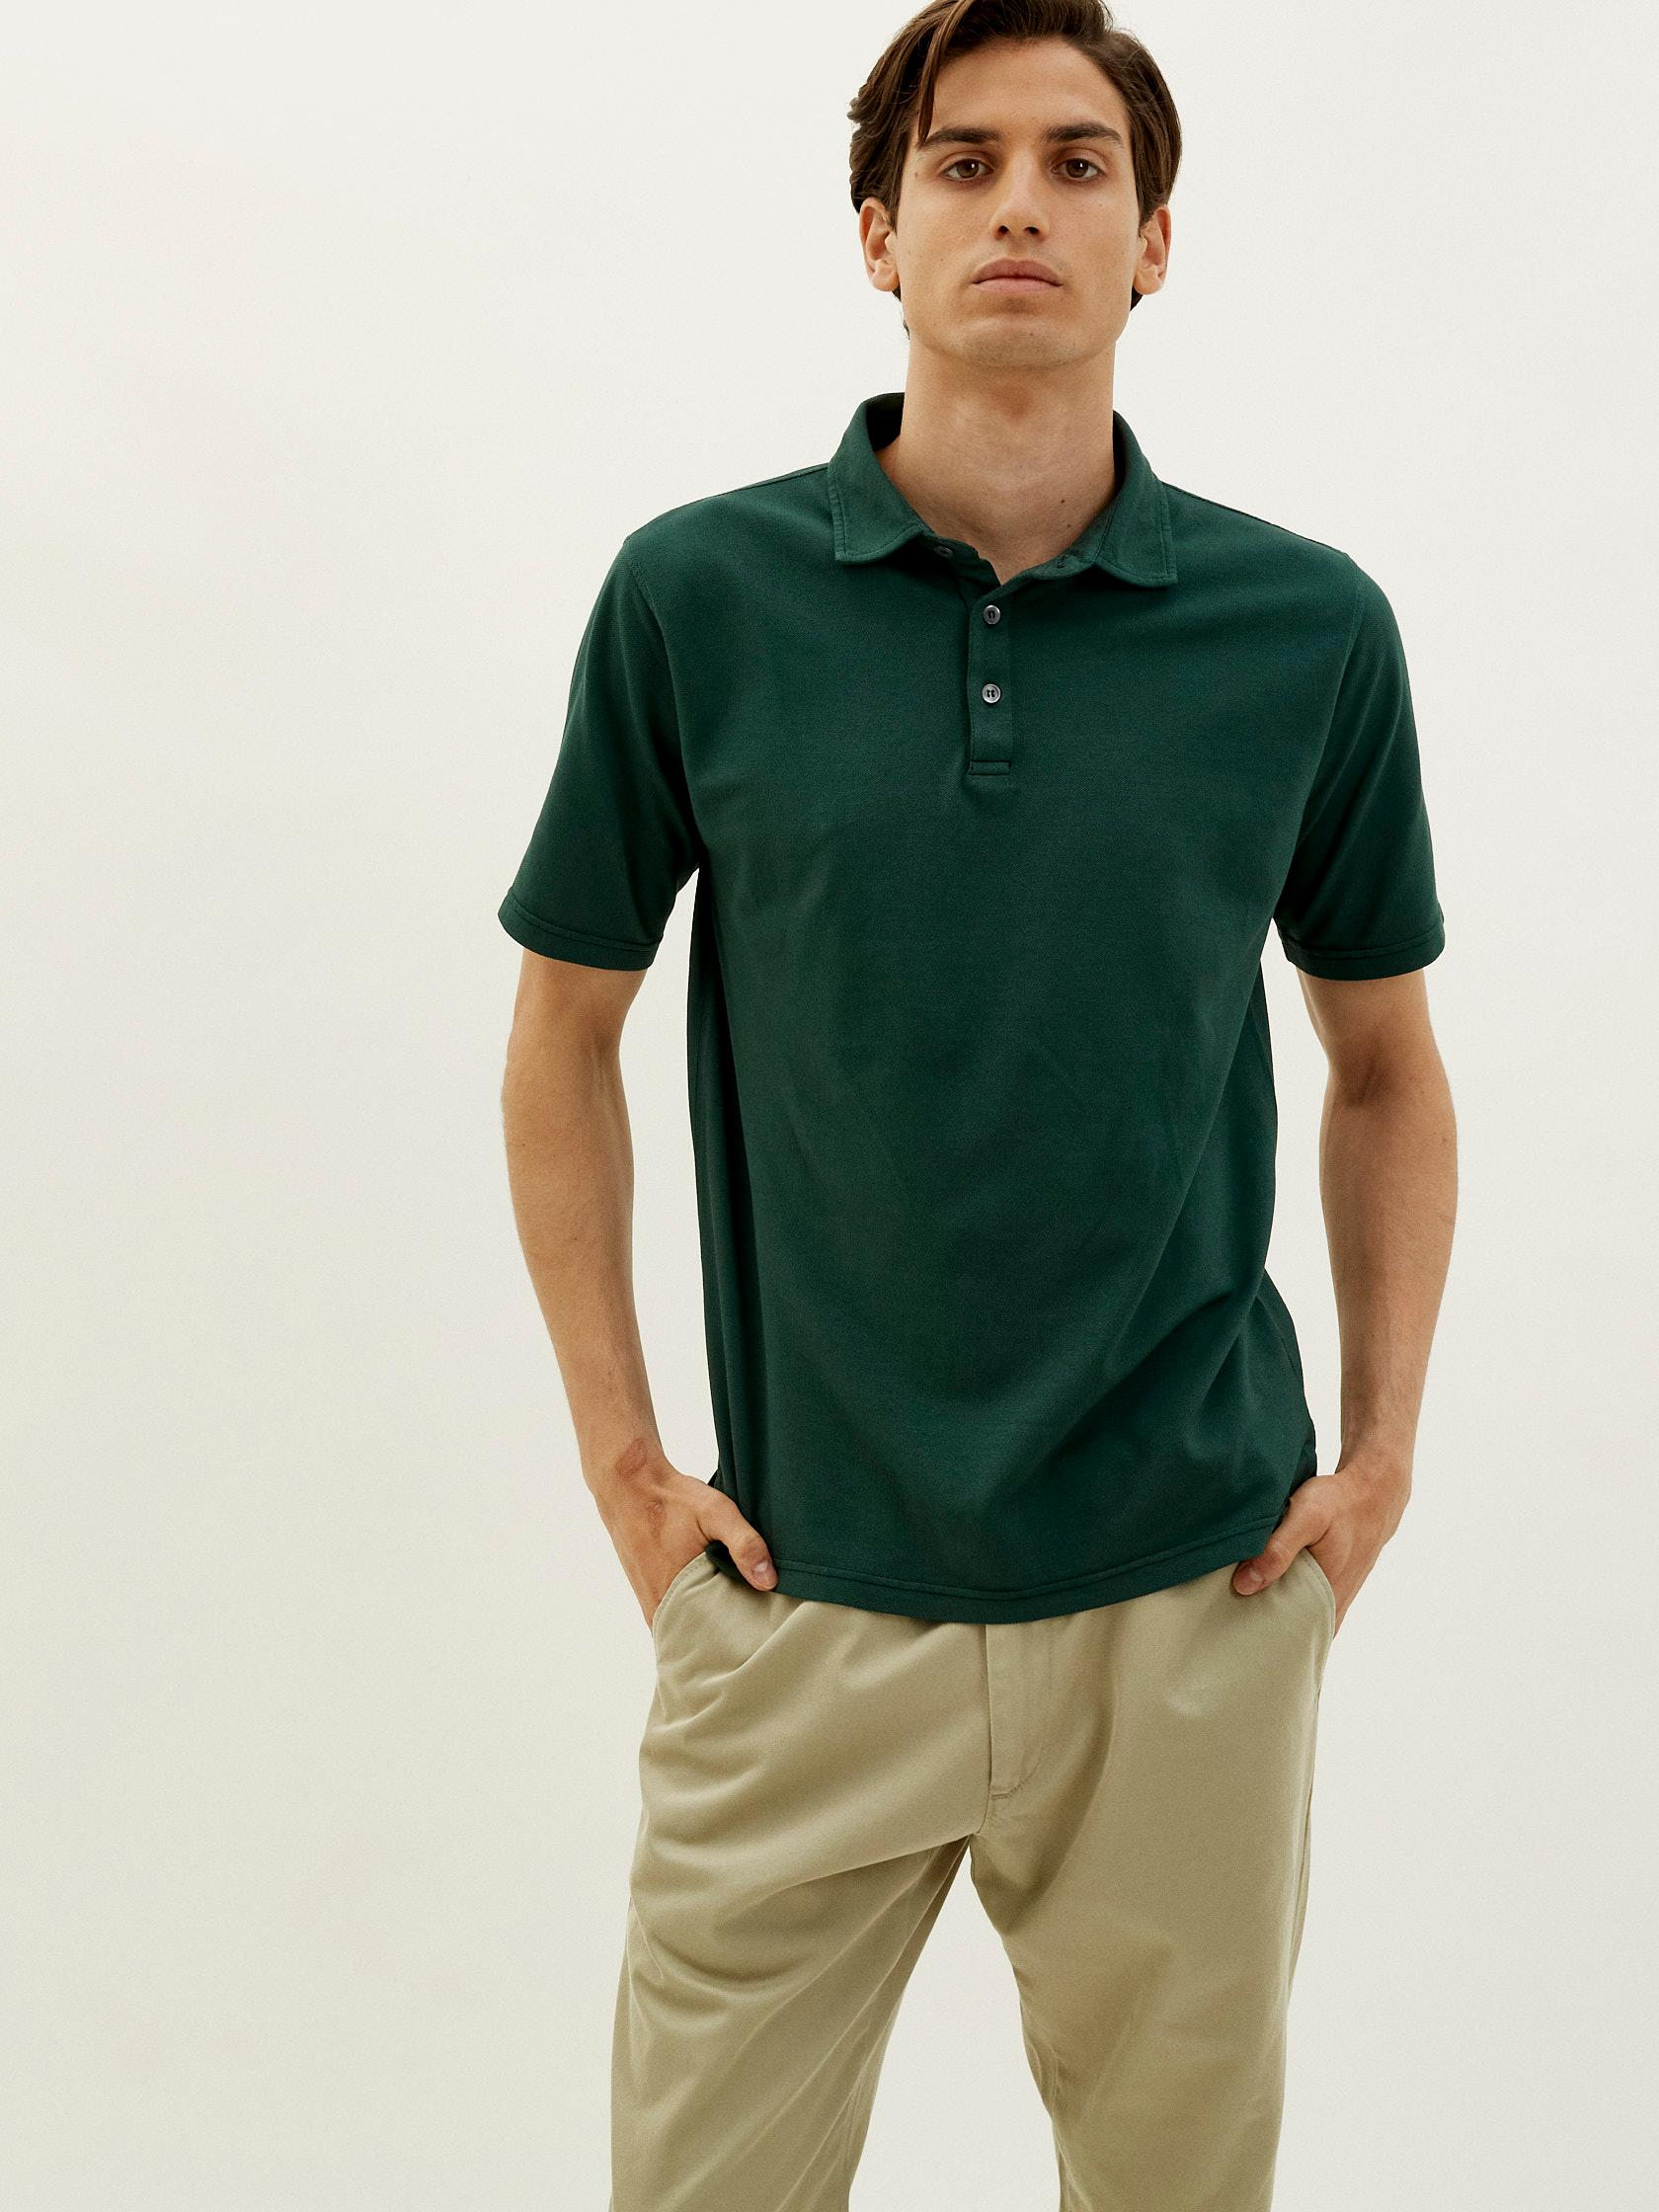 q es polo shirt,Save up to 15%,www.ilcascinone.com